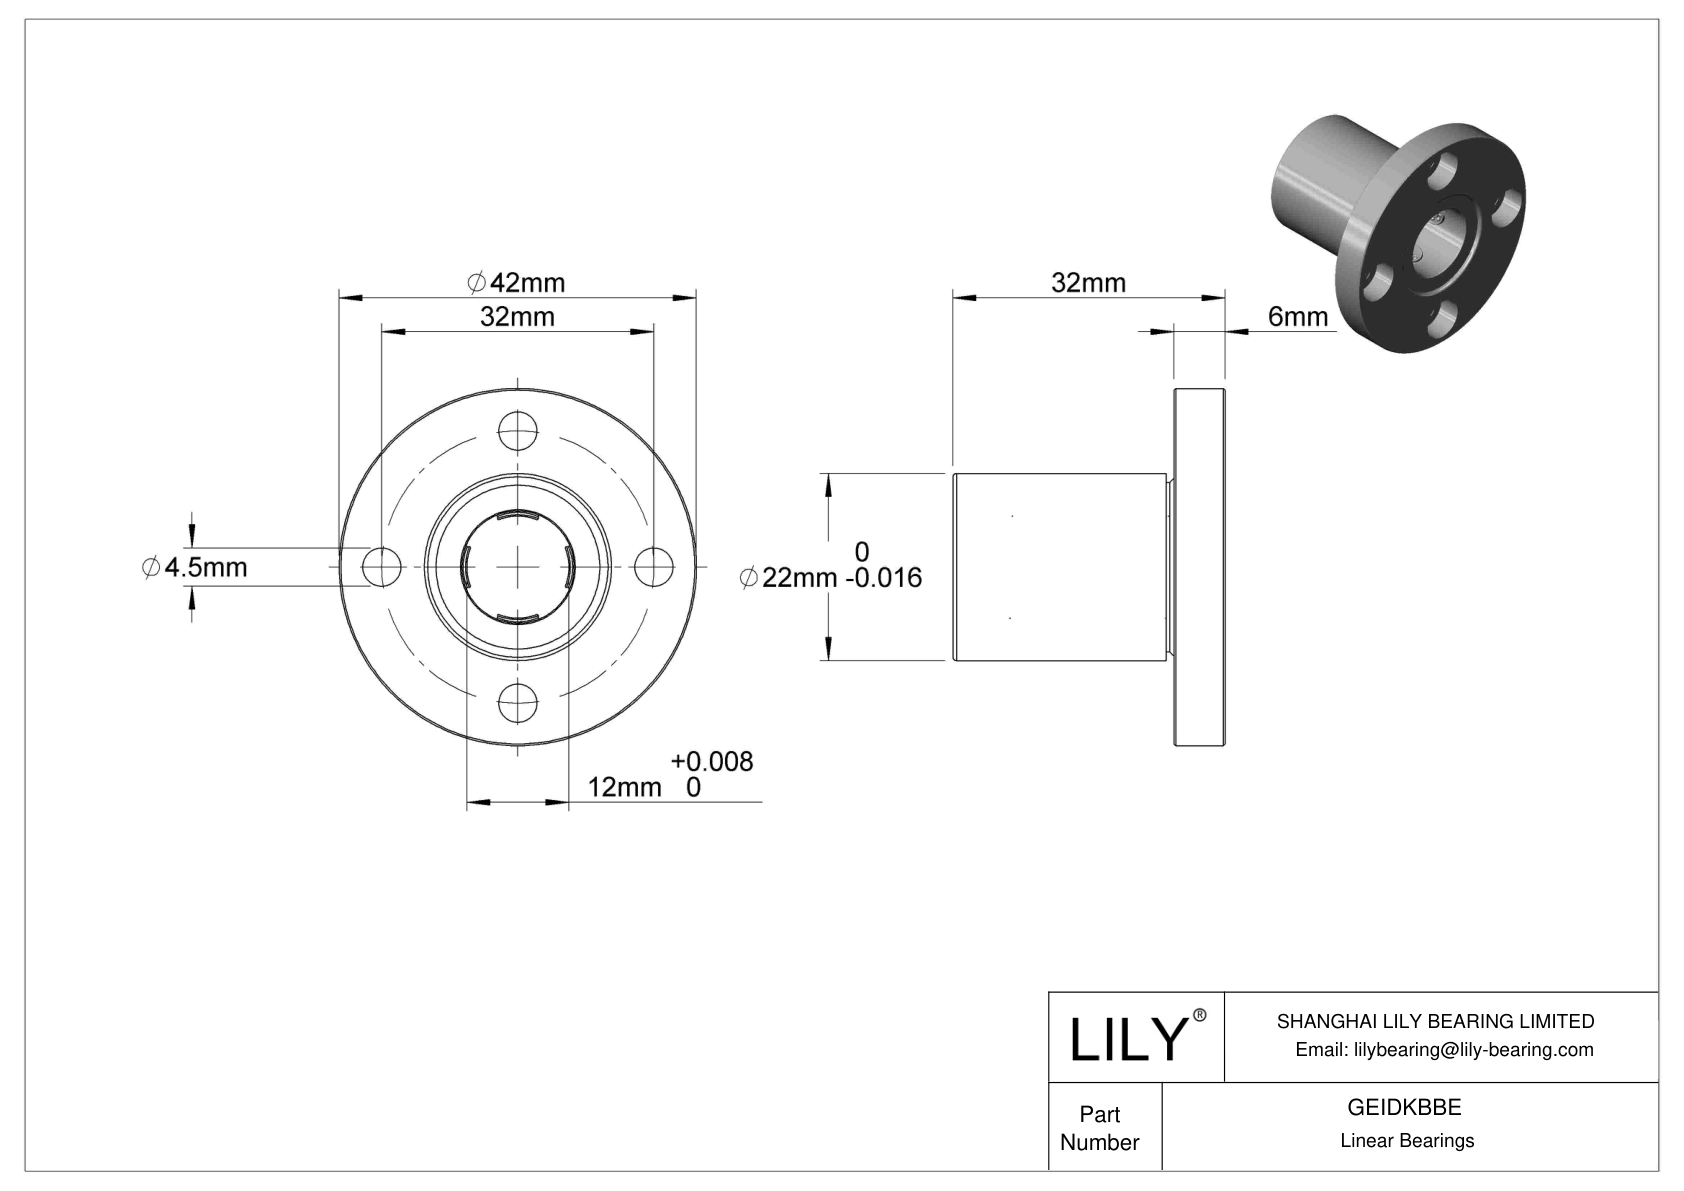 GEIDKBBE Flange-Mounted Linear Ball Bearings cad drawing